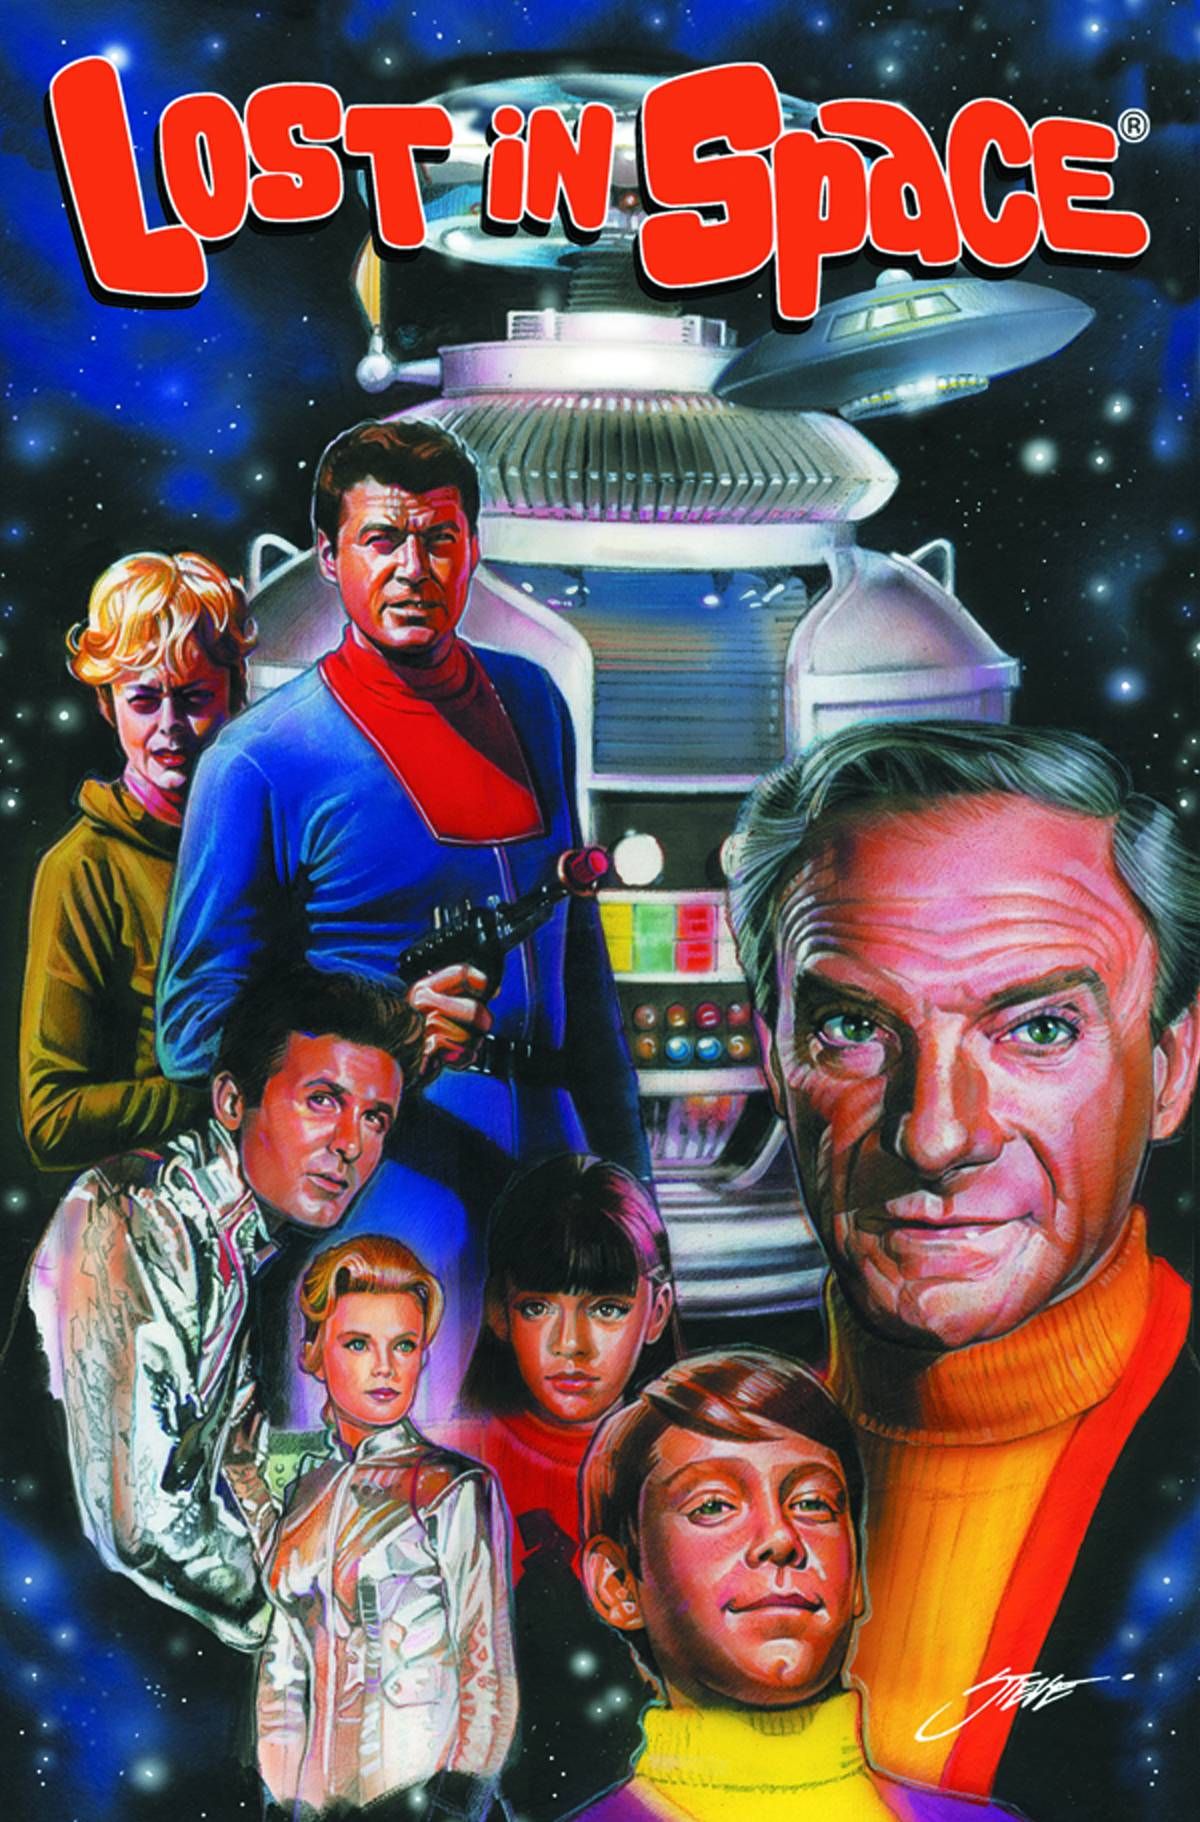 Lost in Space: The Lost Adventures #1 Comic